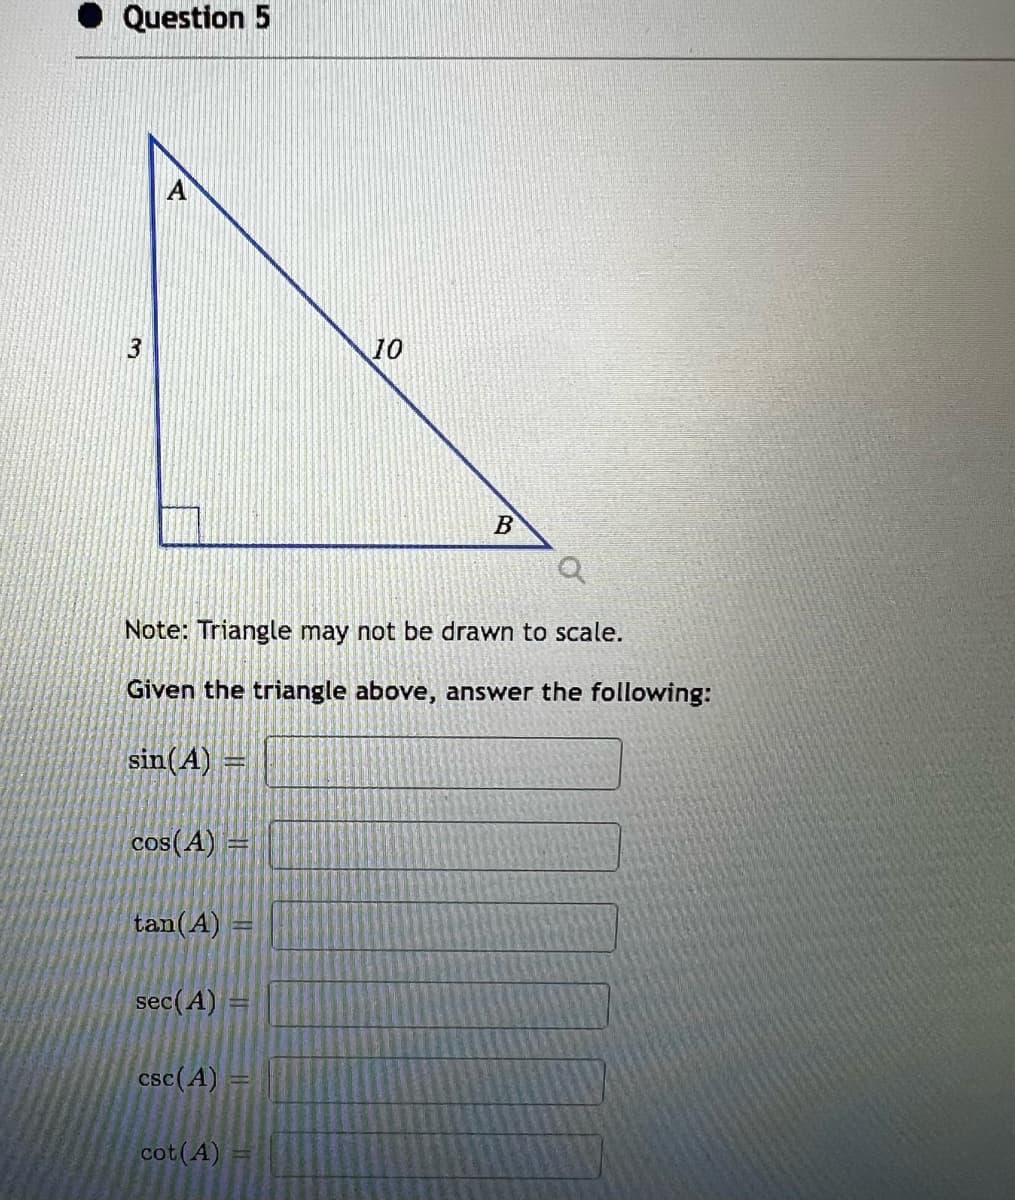 Question 5
ينا
3
cos(A) =
Q
Note: Triangle may not be drawn to scale.
Given the triangle above, answer the following:
sin(A) =
tan (A)
sec (A)
csc (A)
cot (A)
10
P
B